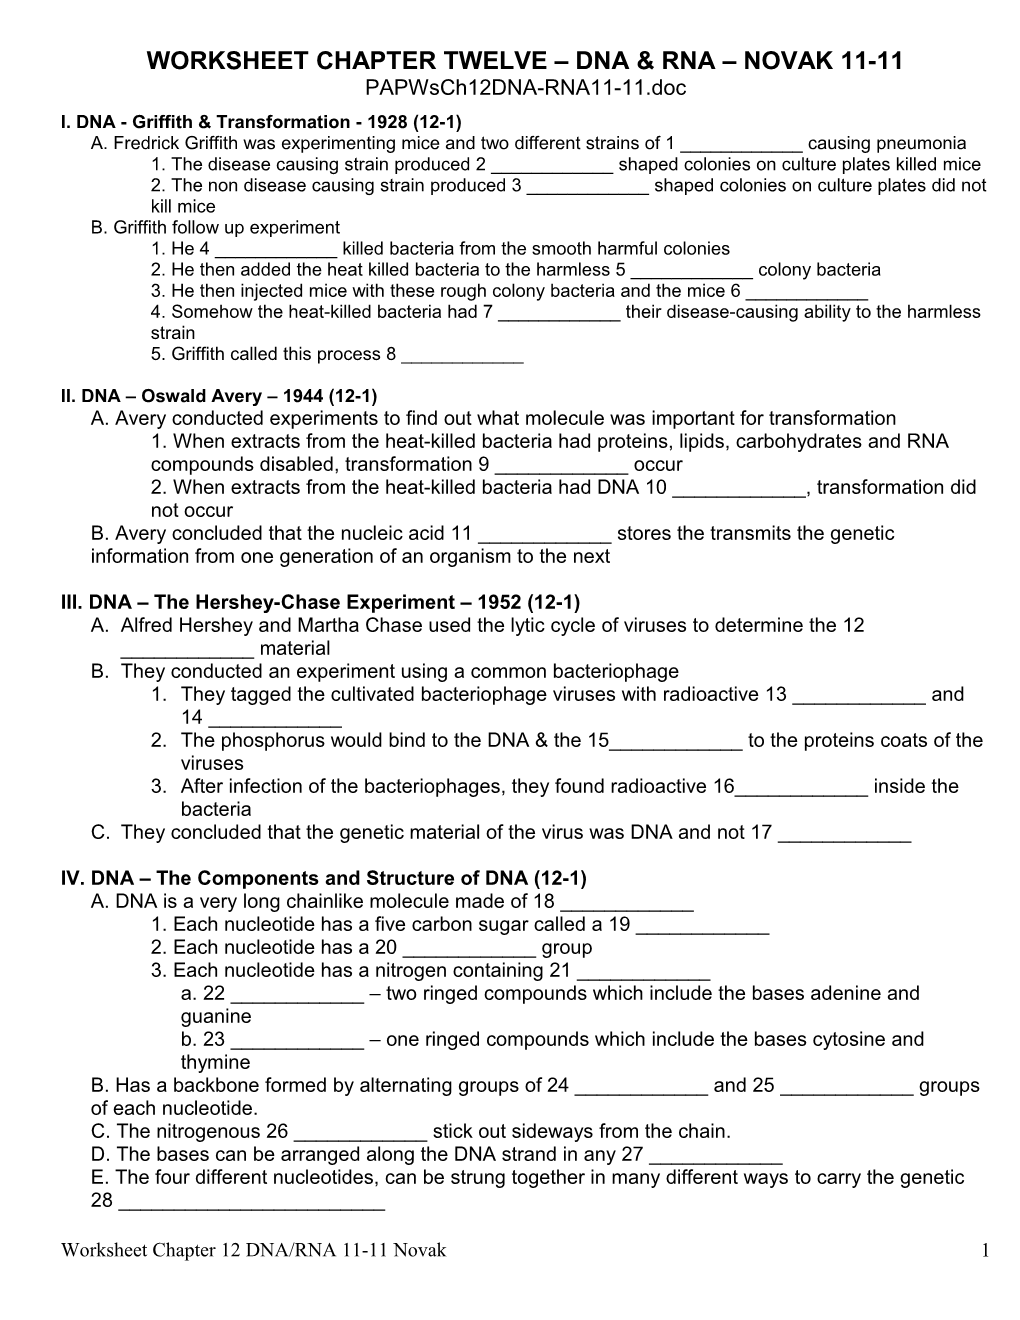 Worksheet Chapter Four Ecosystems and Communities Novak 9-8